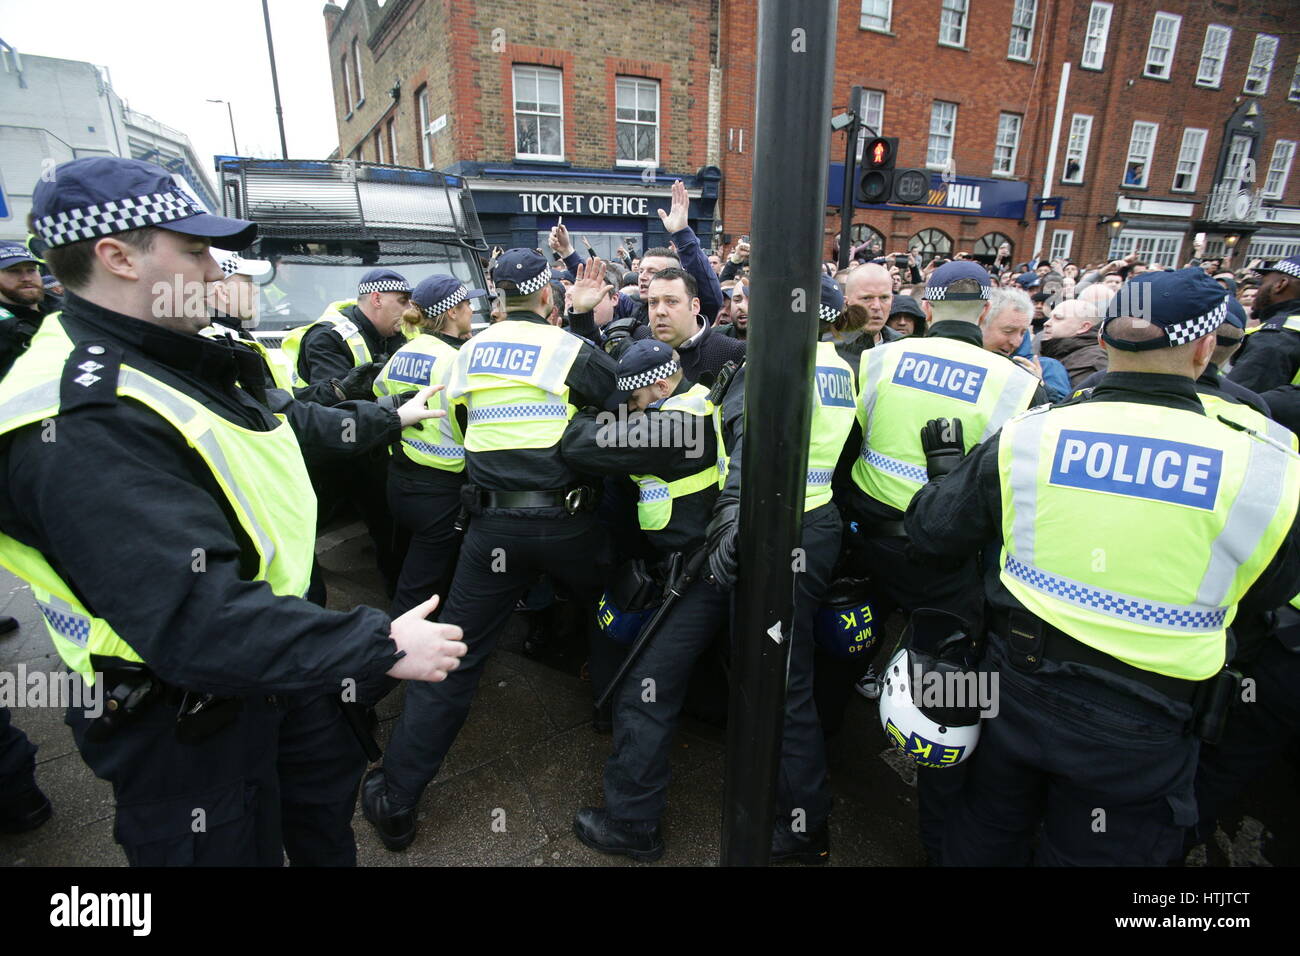 Football fans face police prior to the Tottenham Hotspur v Millwall, Emirates FA Cup quarter final game at White Hart Lane, Tottenham. Stock Photo